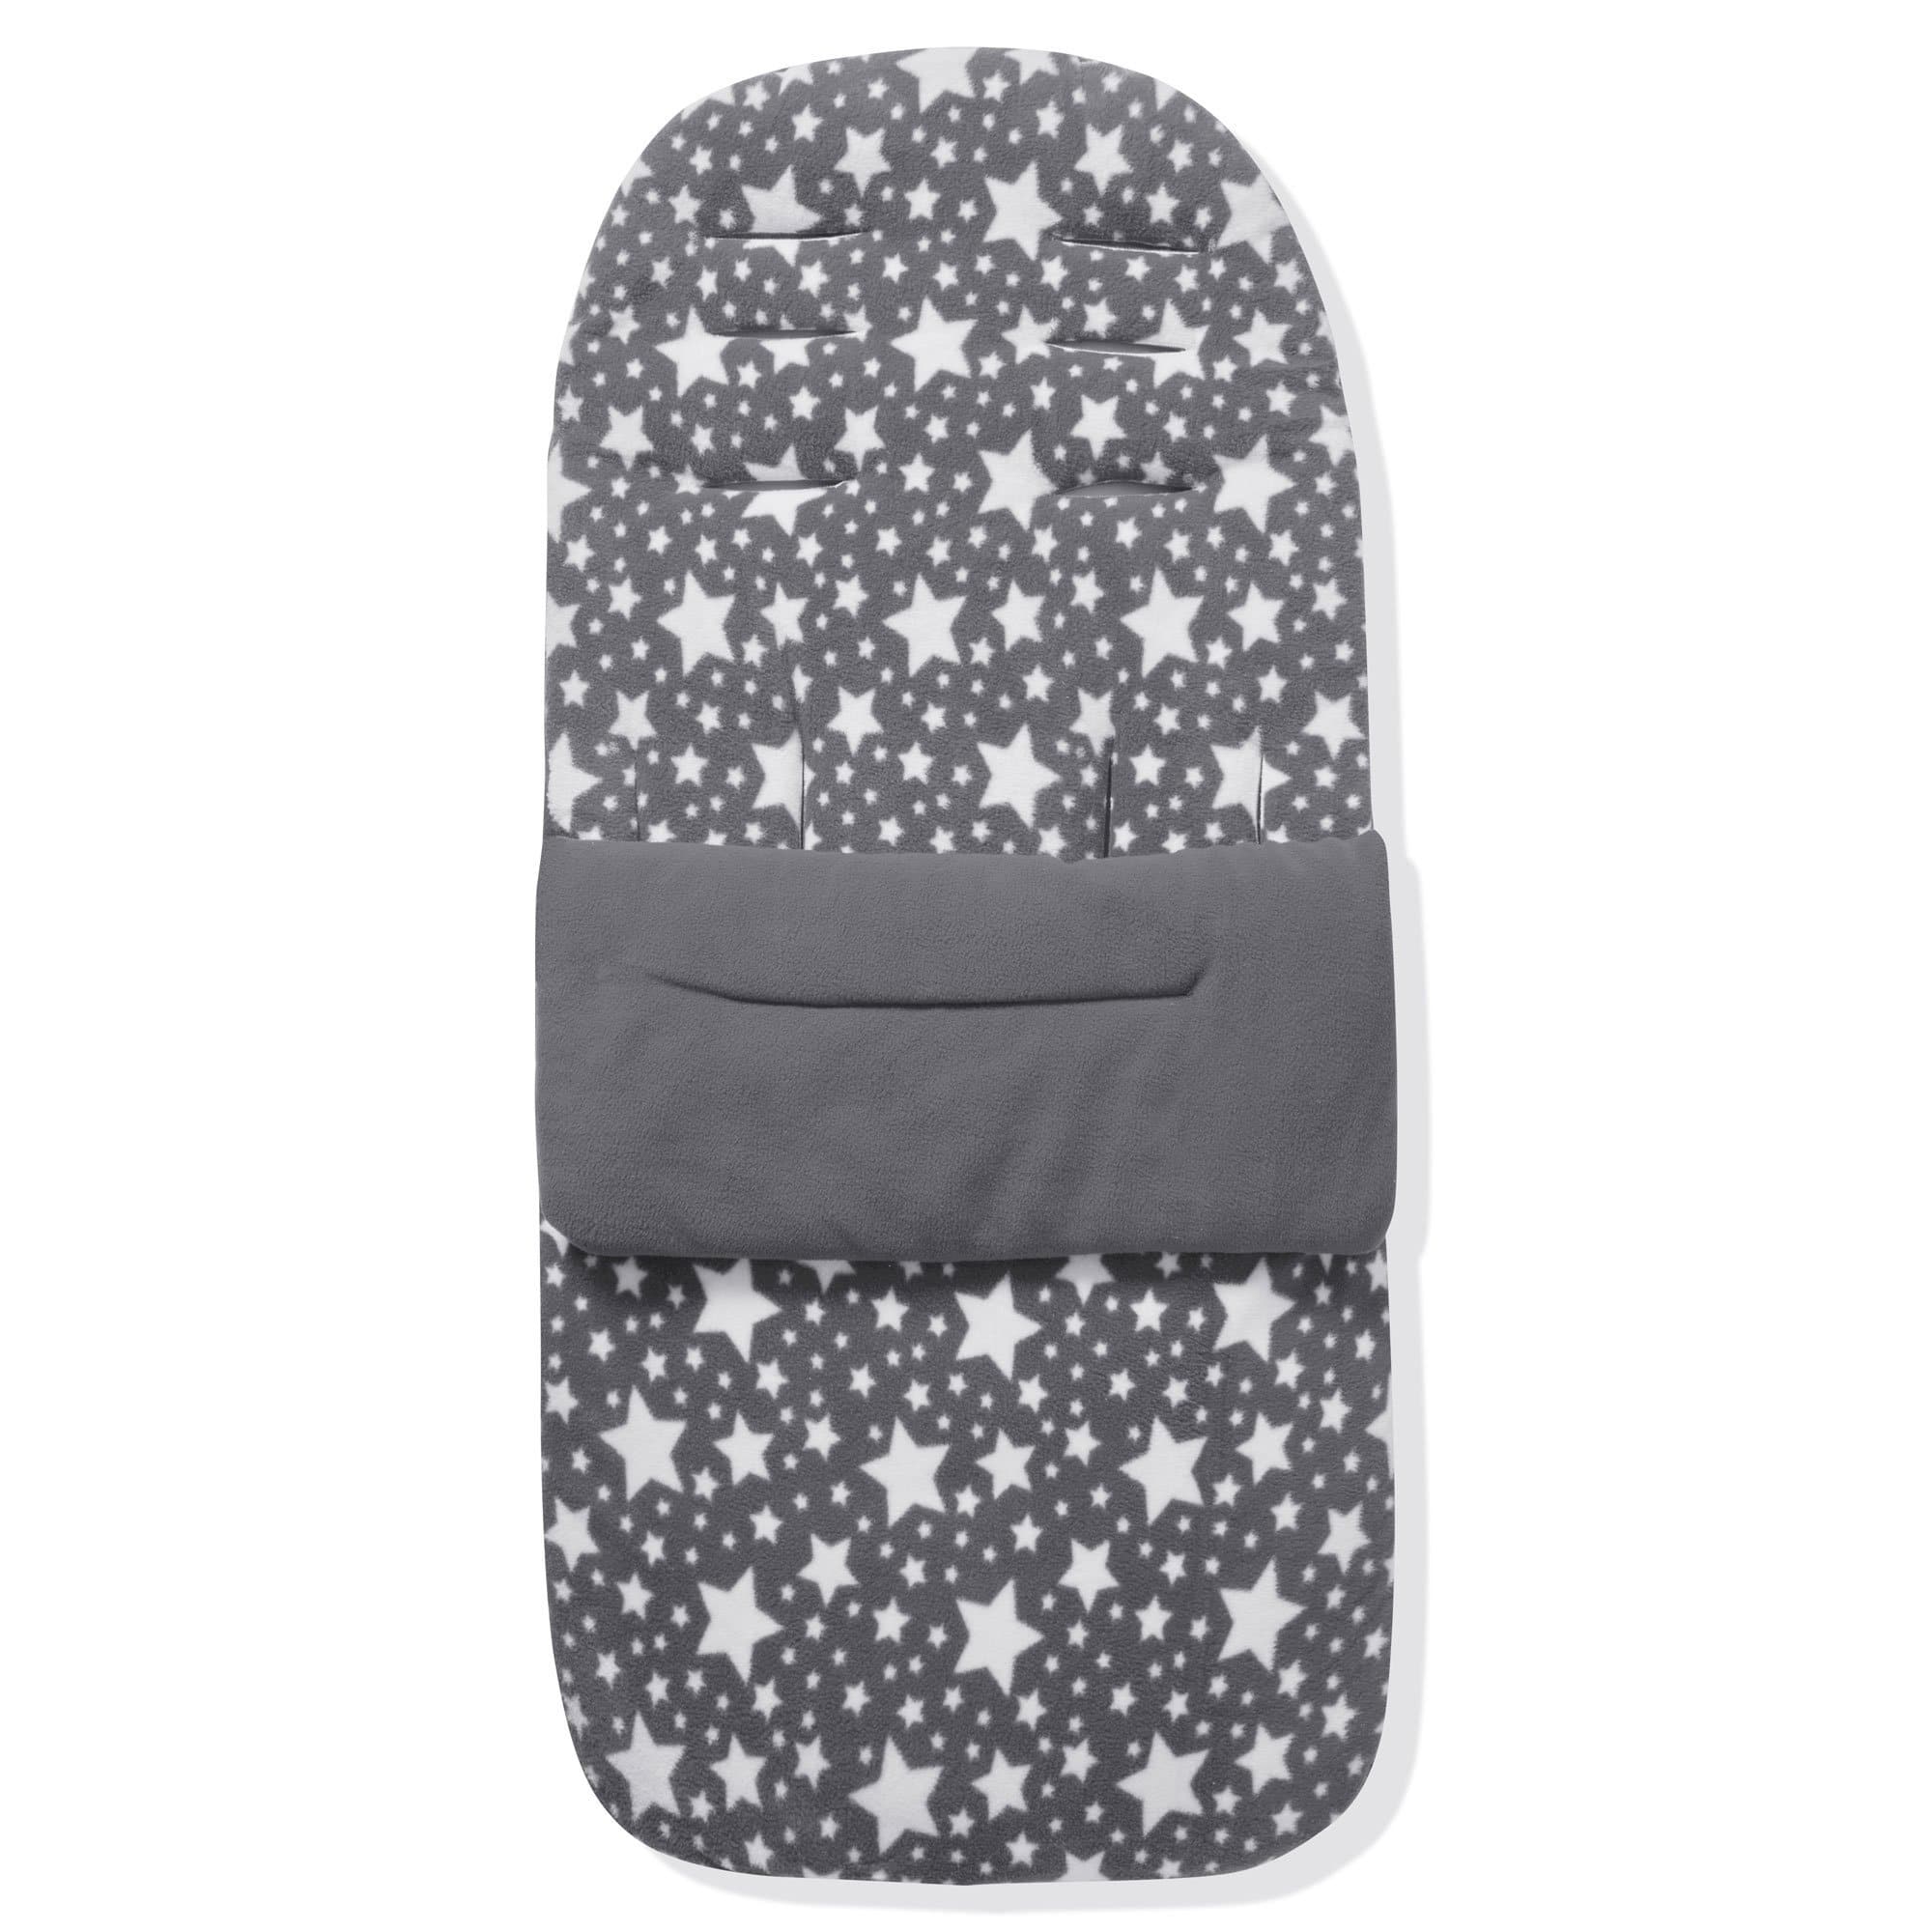 Fleece Footmuff / Cosy Toes Compatible With Baby Weavers - Grey Star / Fits All Models | For Your Little One